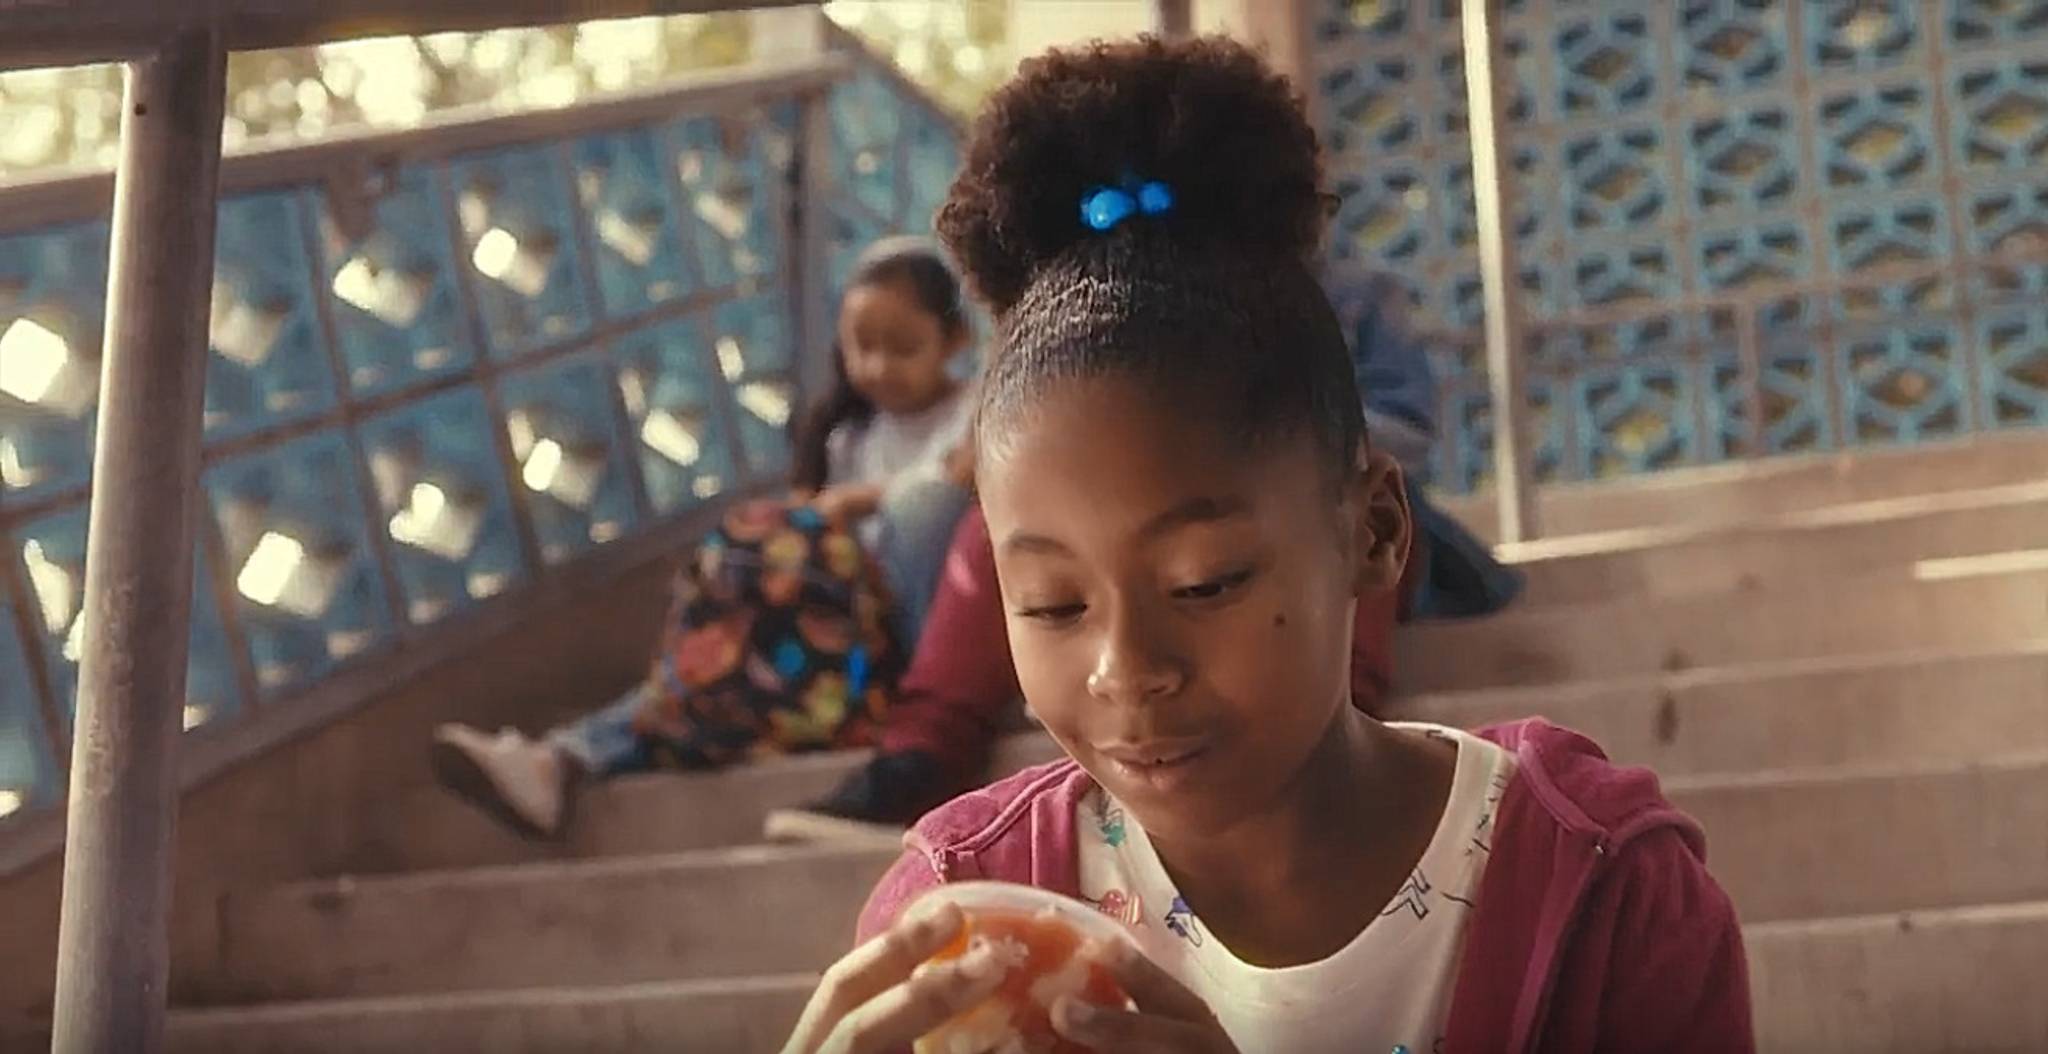 Dole ad taps into power of nostalgic family traditions